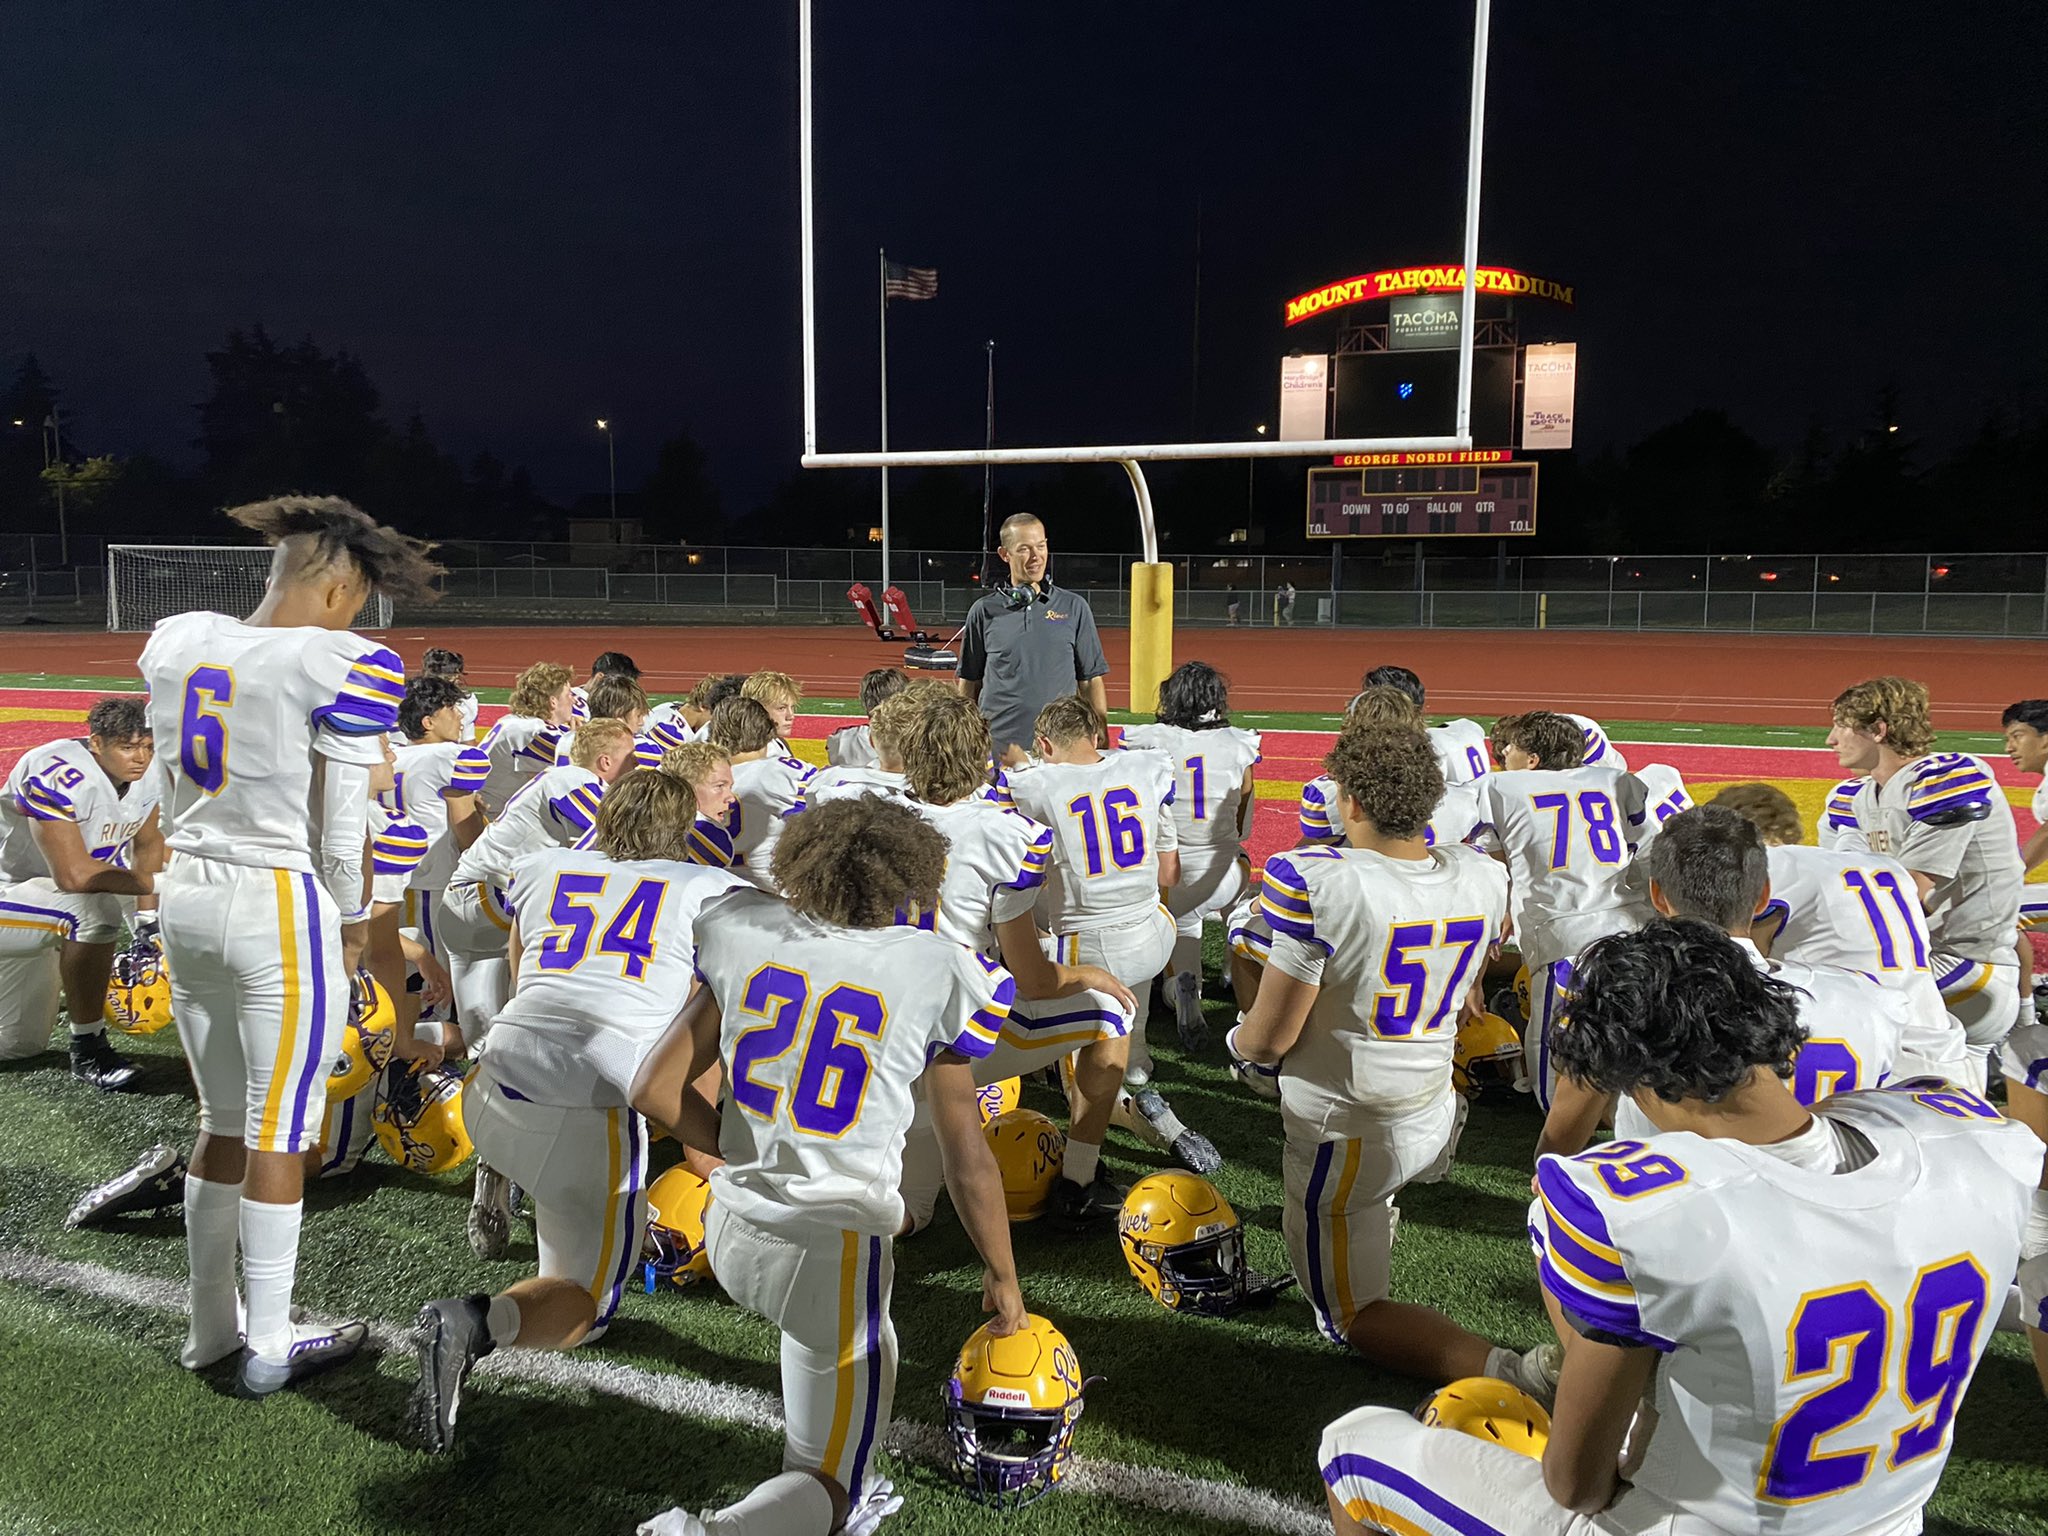 Coach Brett Smedley talks to his players after a 34-6 win over Foss on Friday, Sept. 2, 2022.